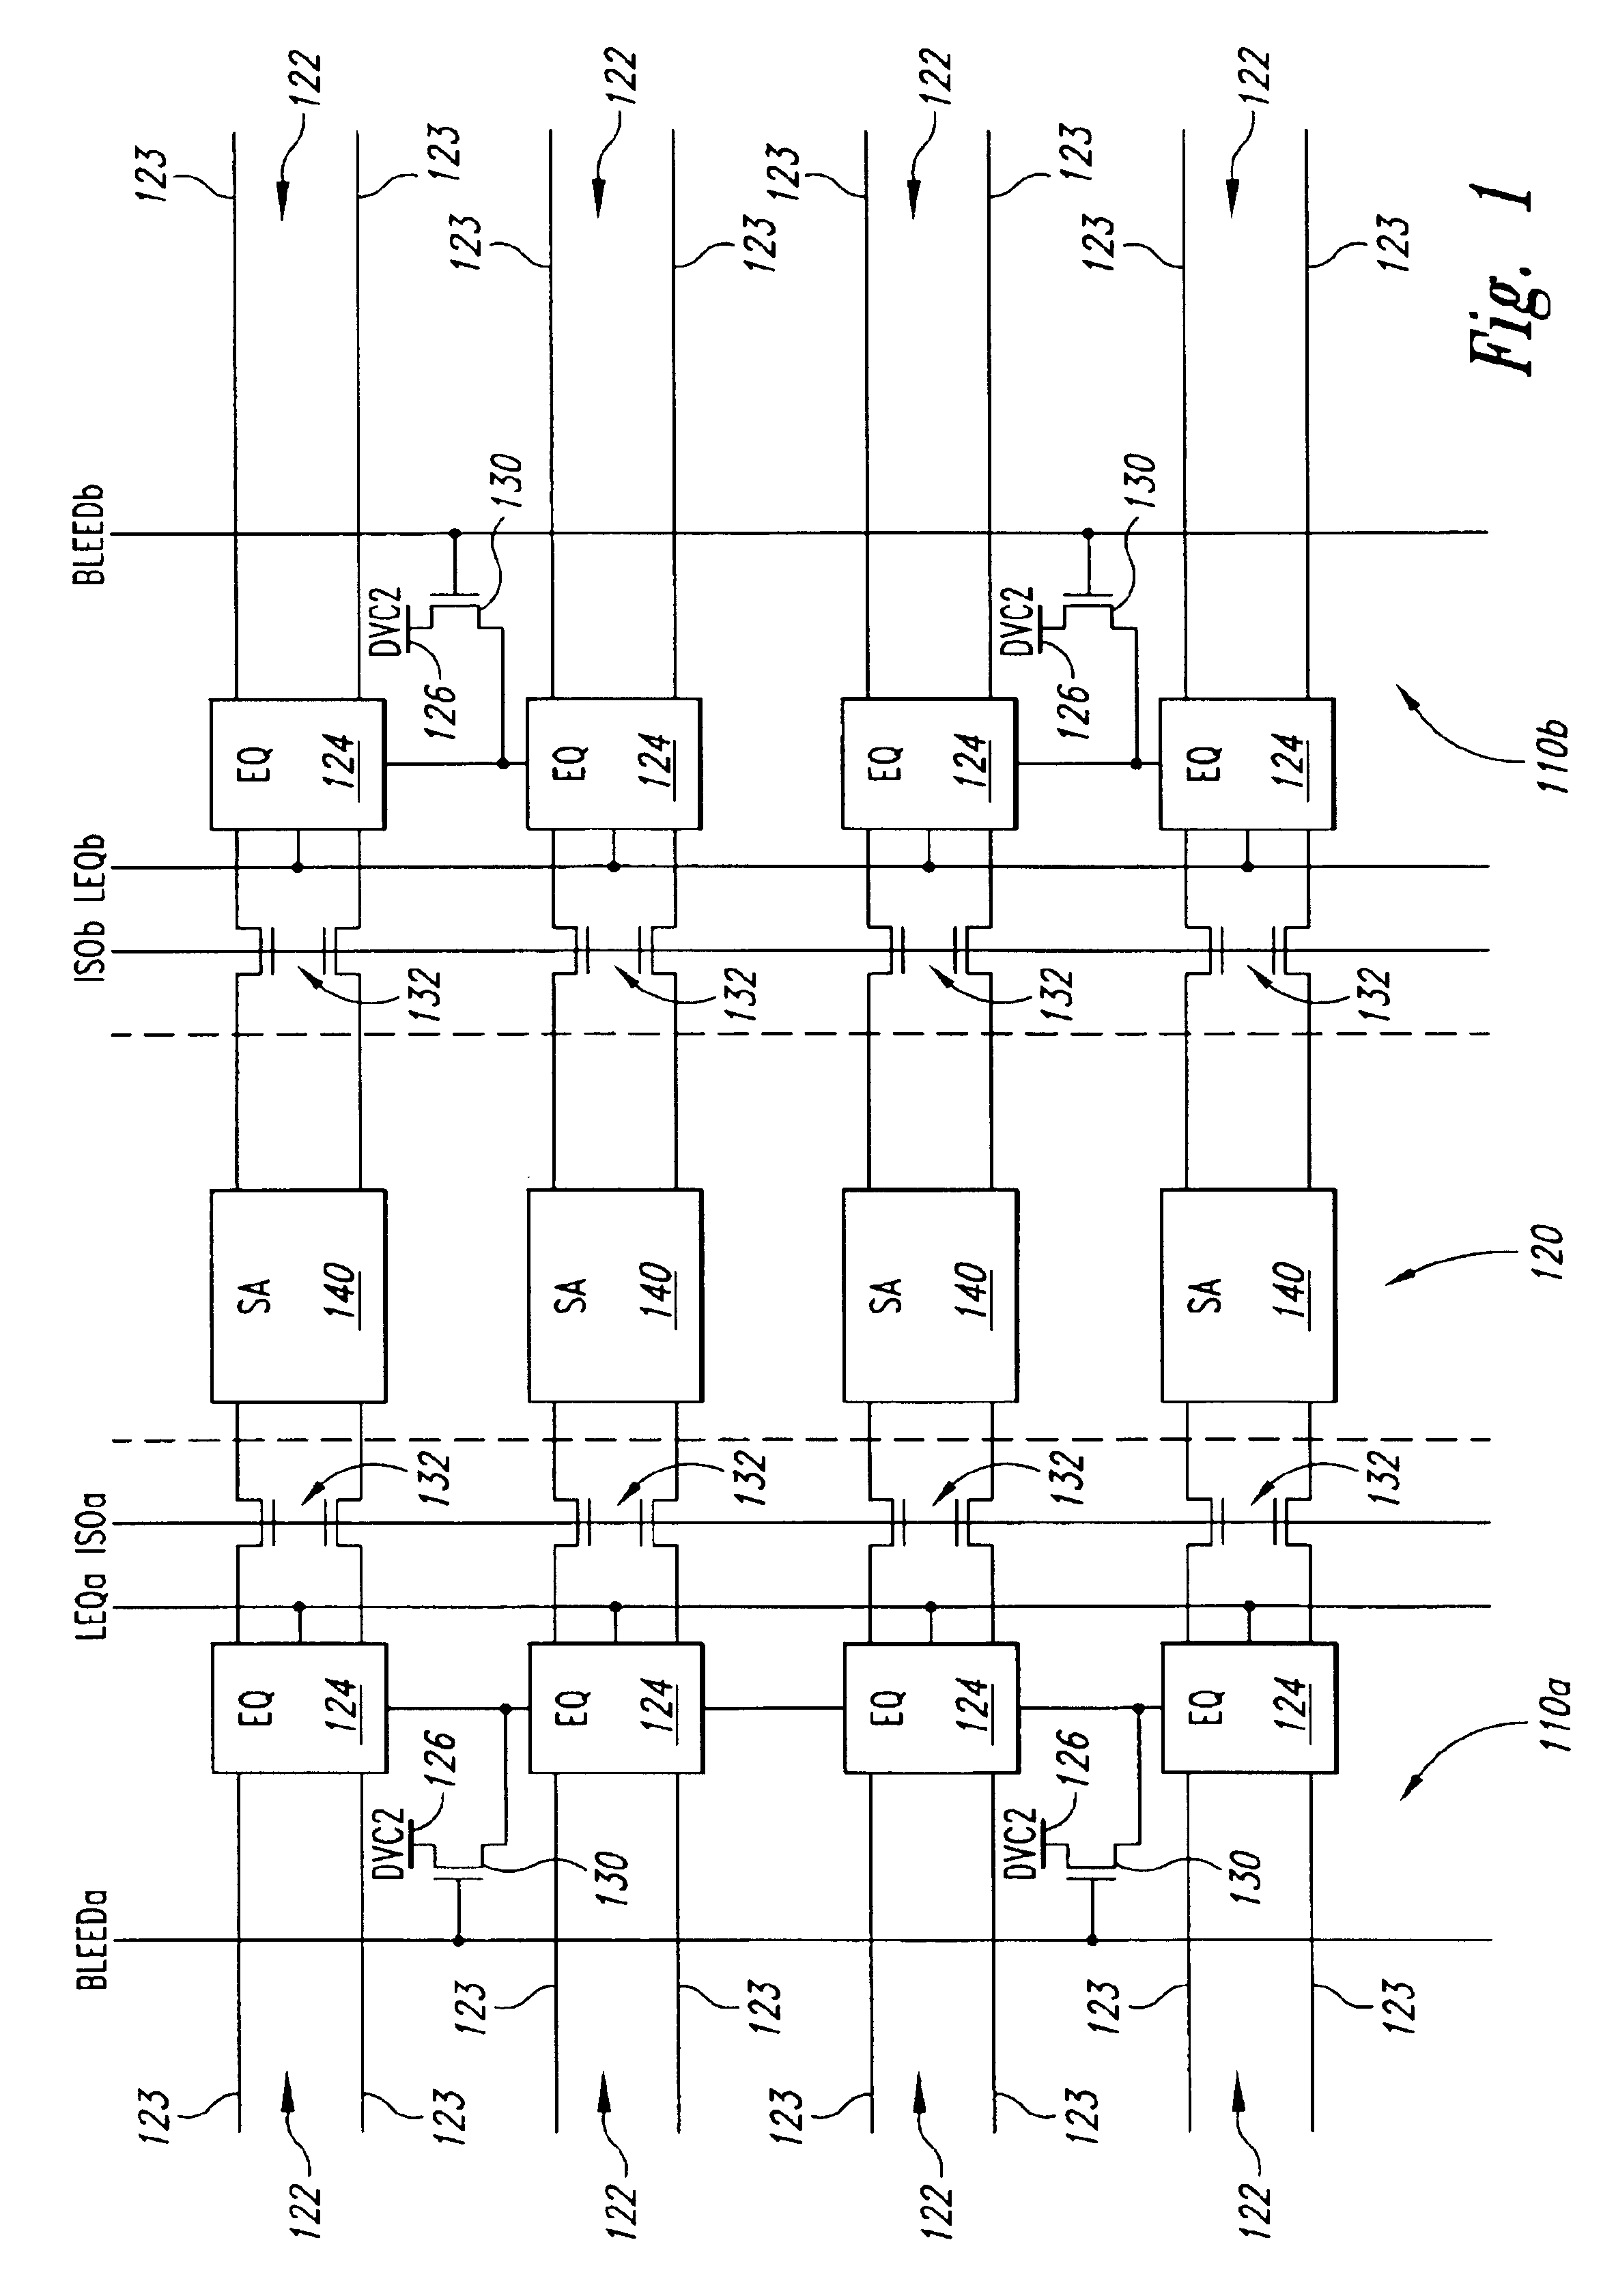 Apparatus and method for a current limiting bleeder device shared by columns of different memory arrays